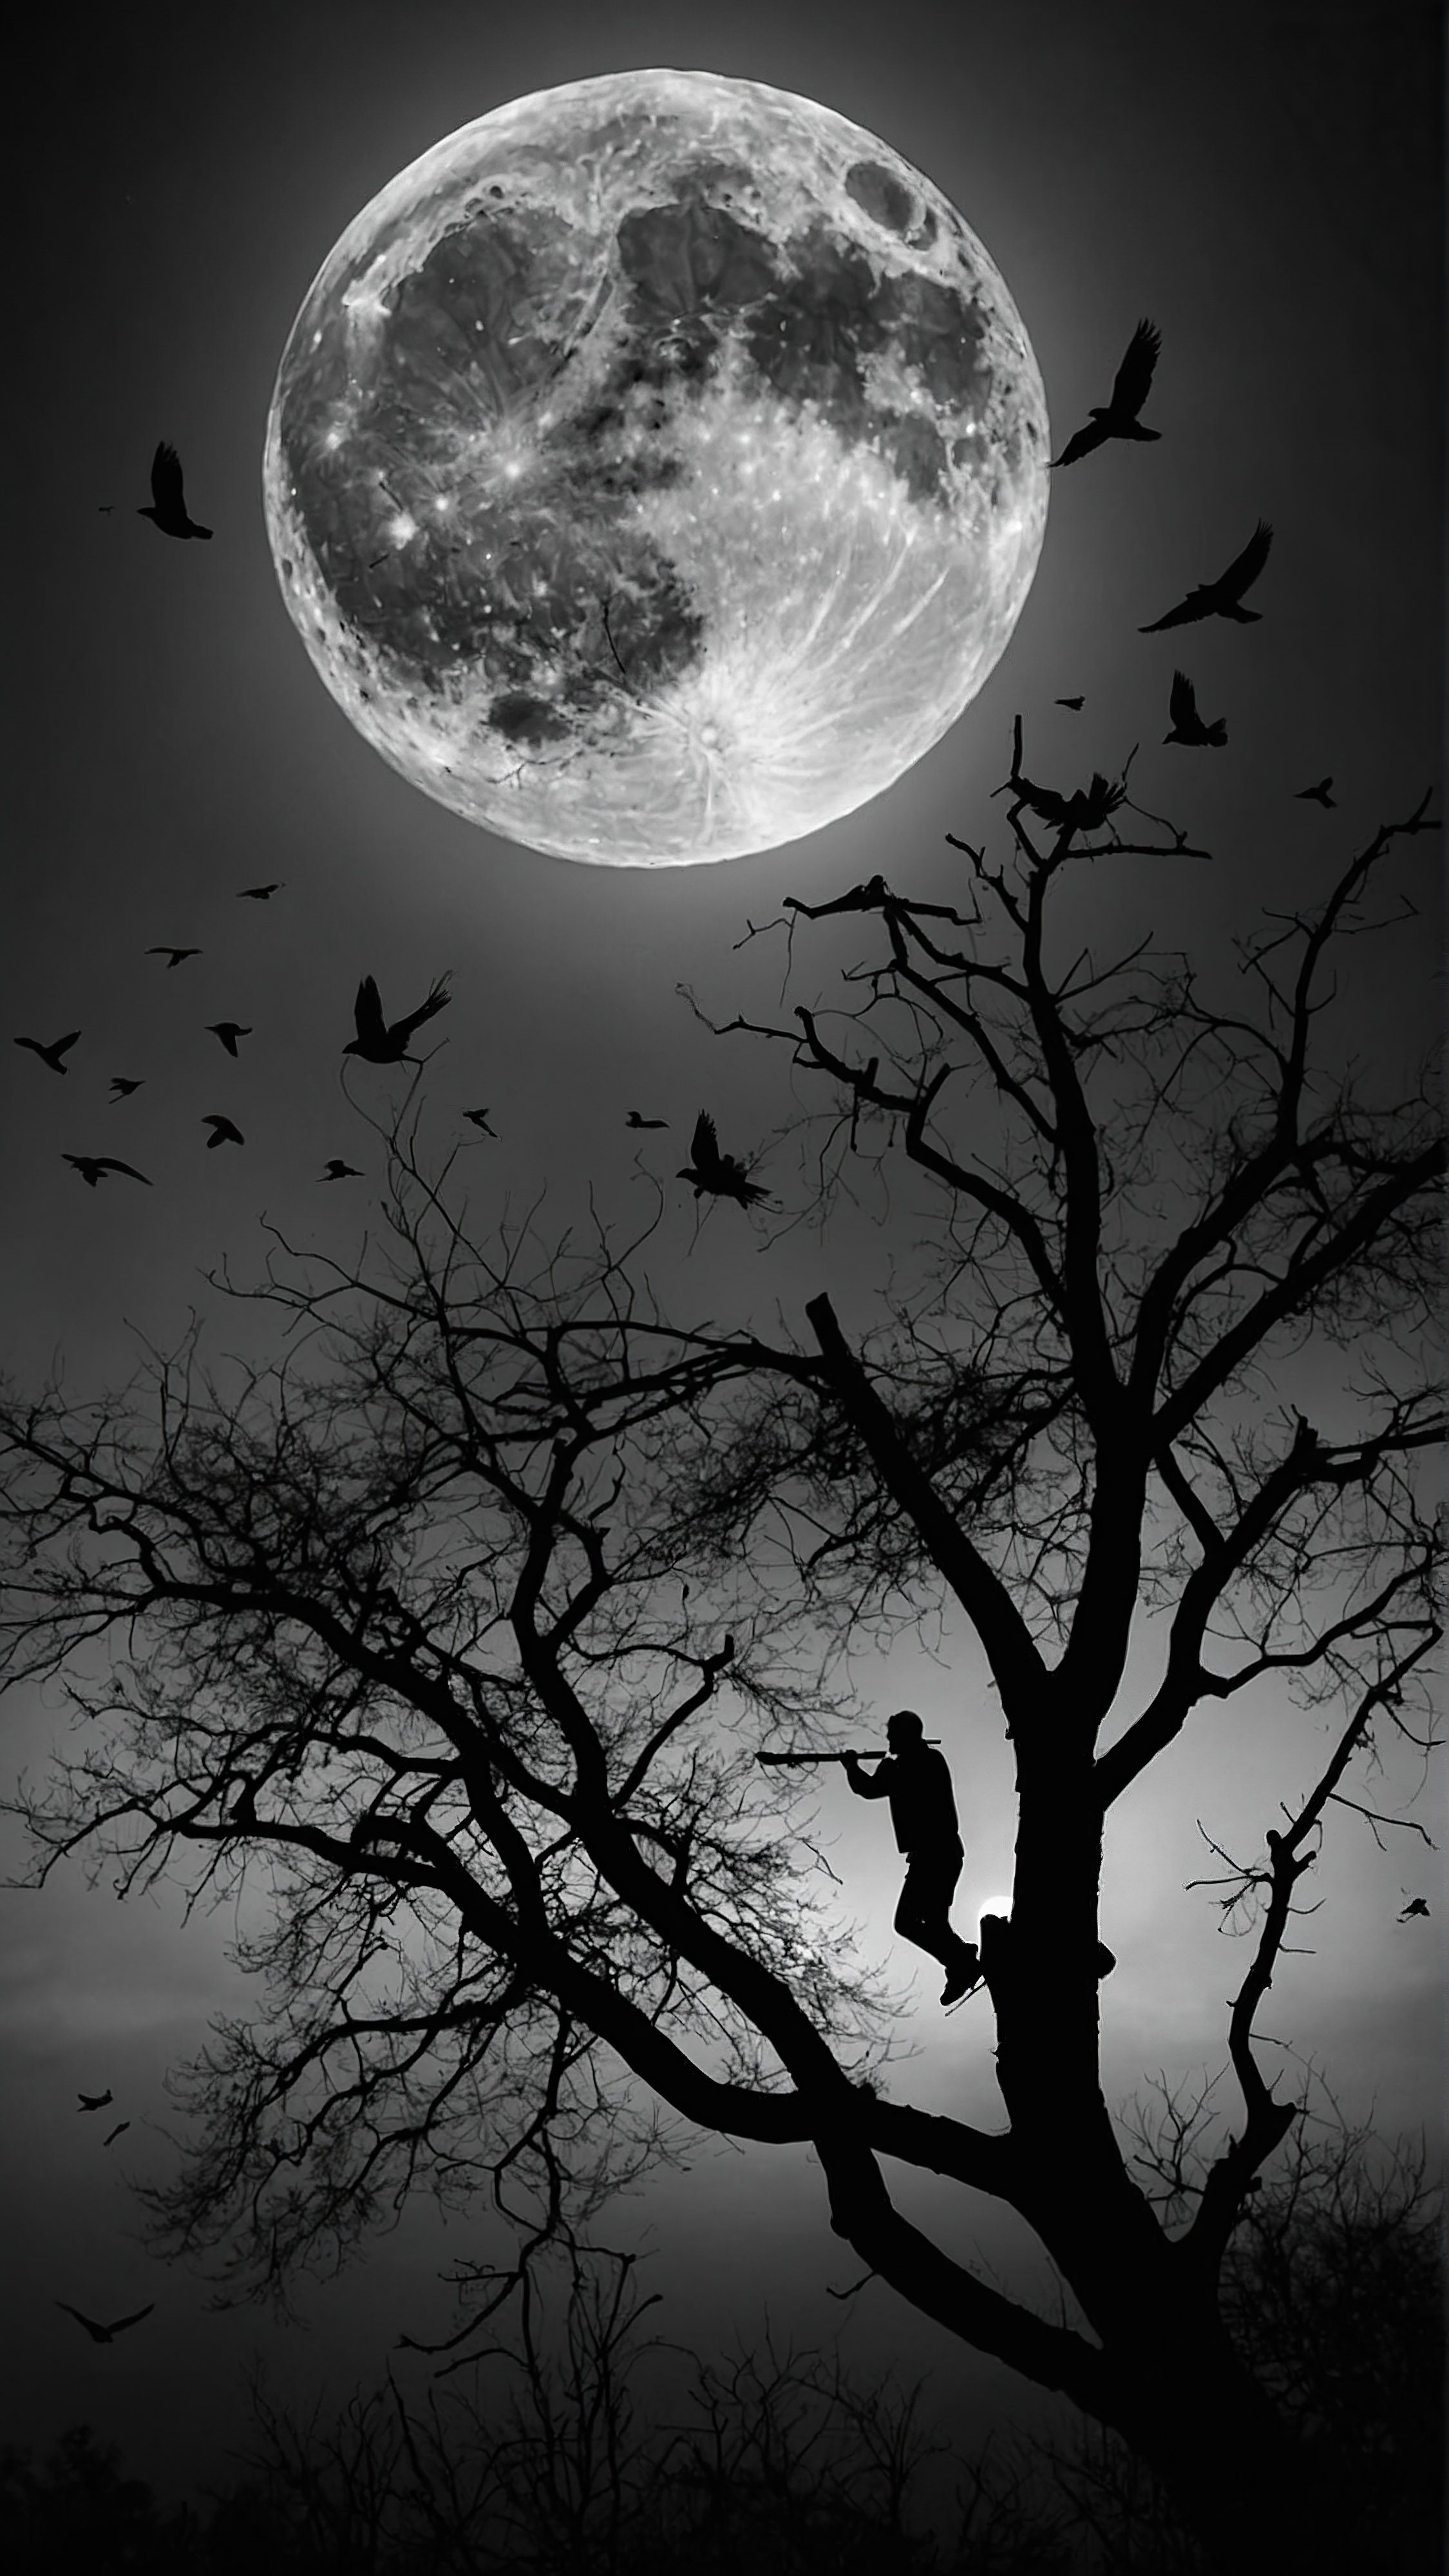 Experience the tranquility with a black and white aesthetic wallpaper for your iPhone, presenting a silhouette of a person sitting on a tree branch, playing the flute against the backdrop of a full moon, with birds flying across.